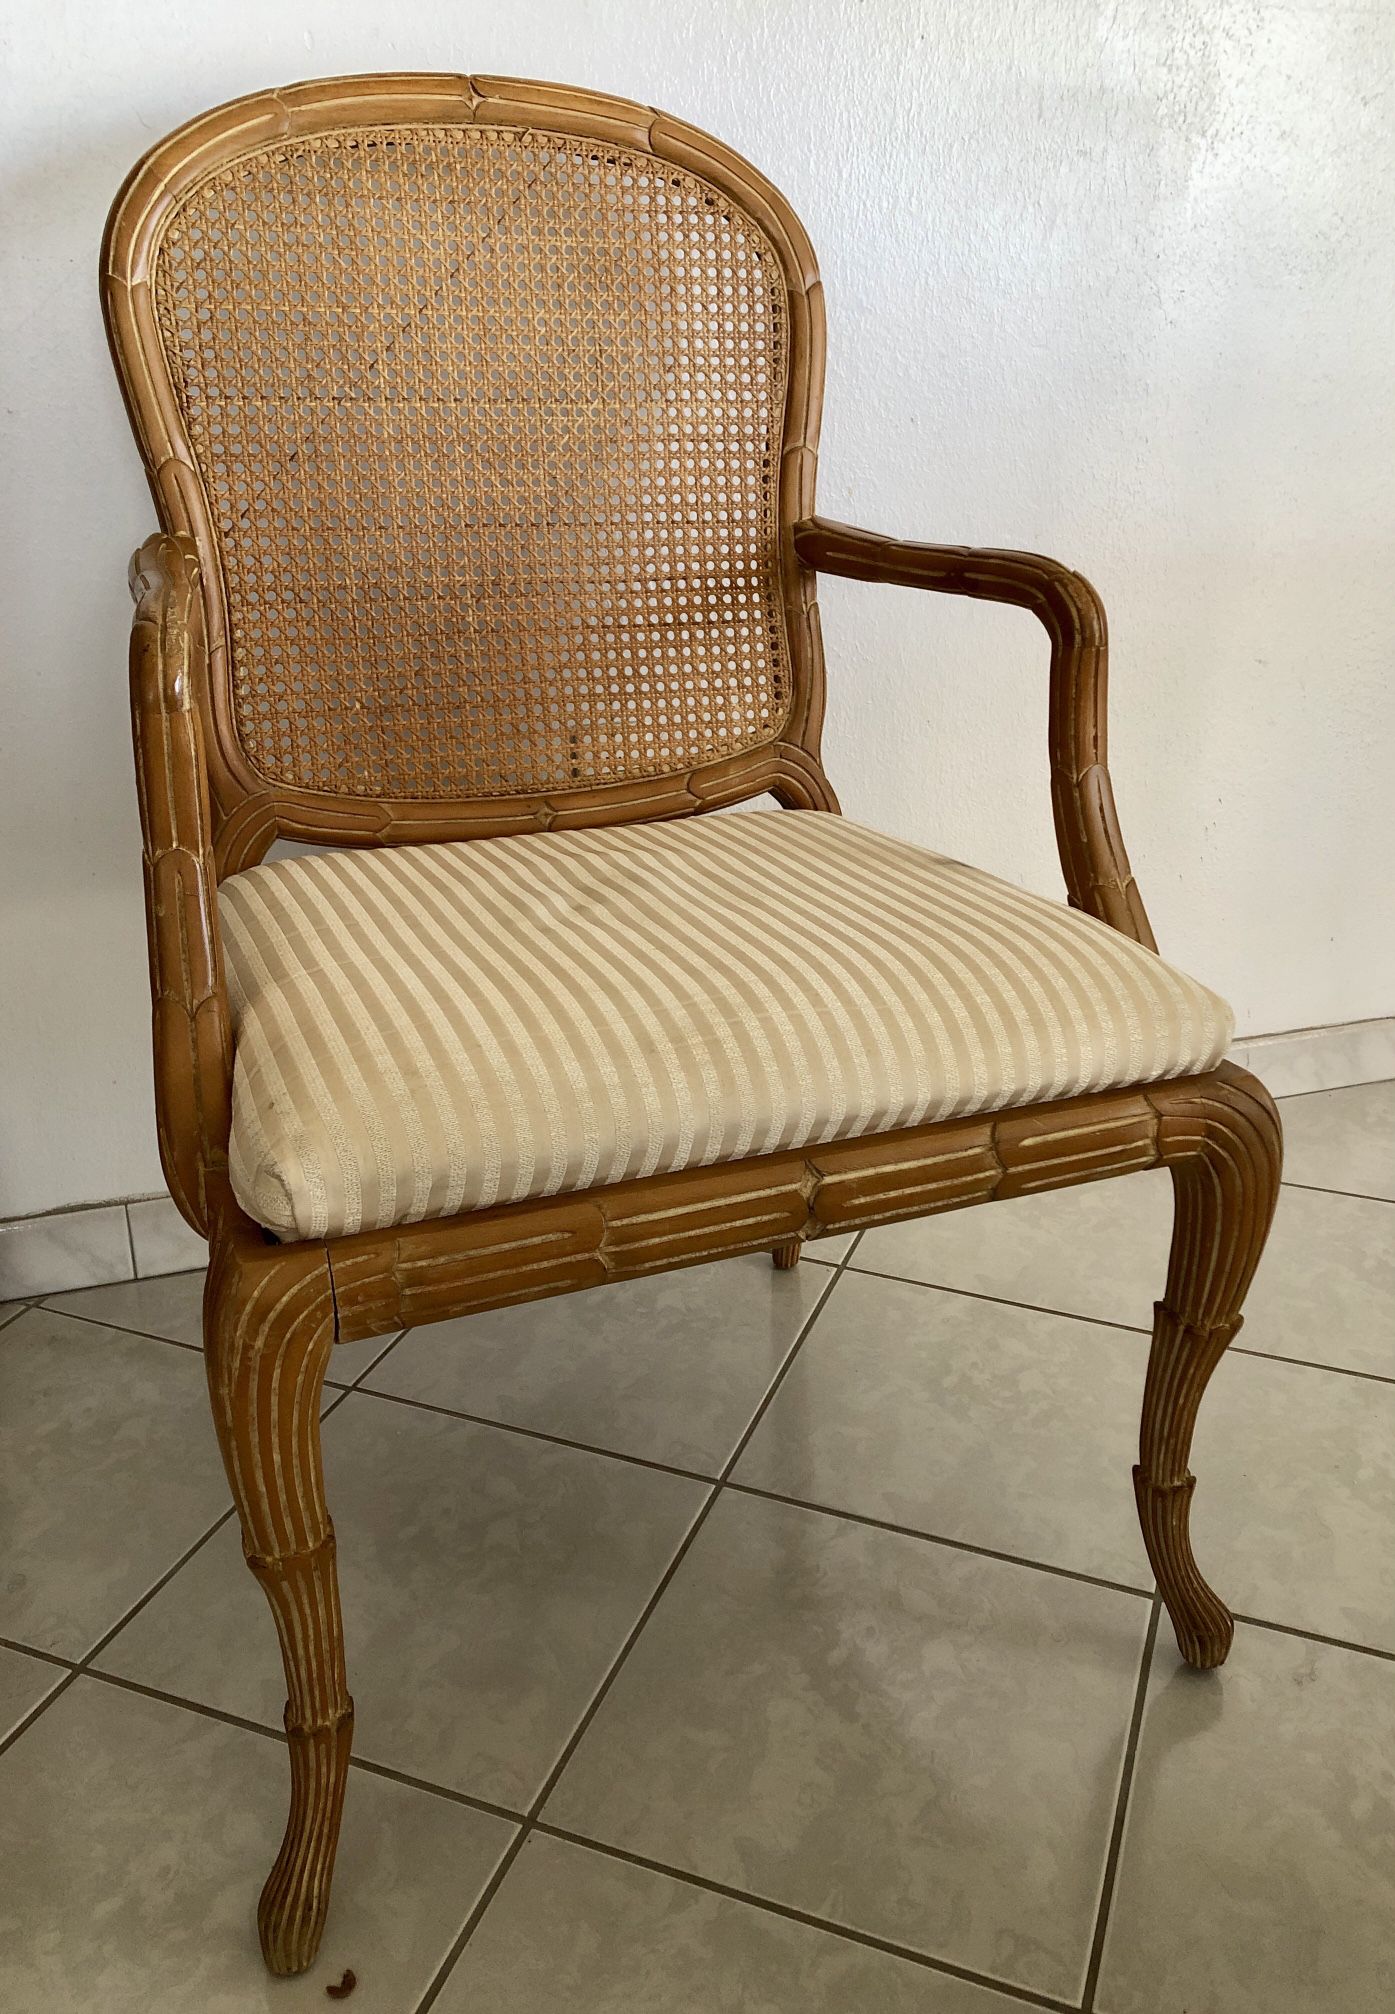 Pair Of Dining Room Armchairs -Balinese Wooden With Cushioned Seats